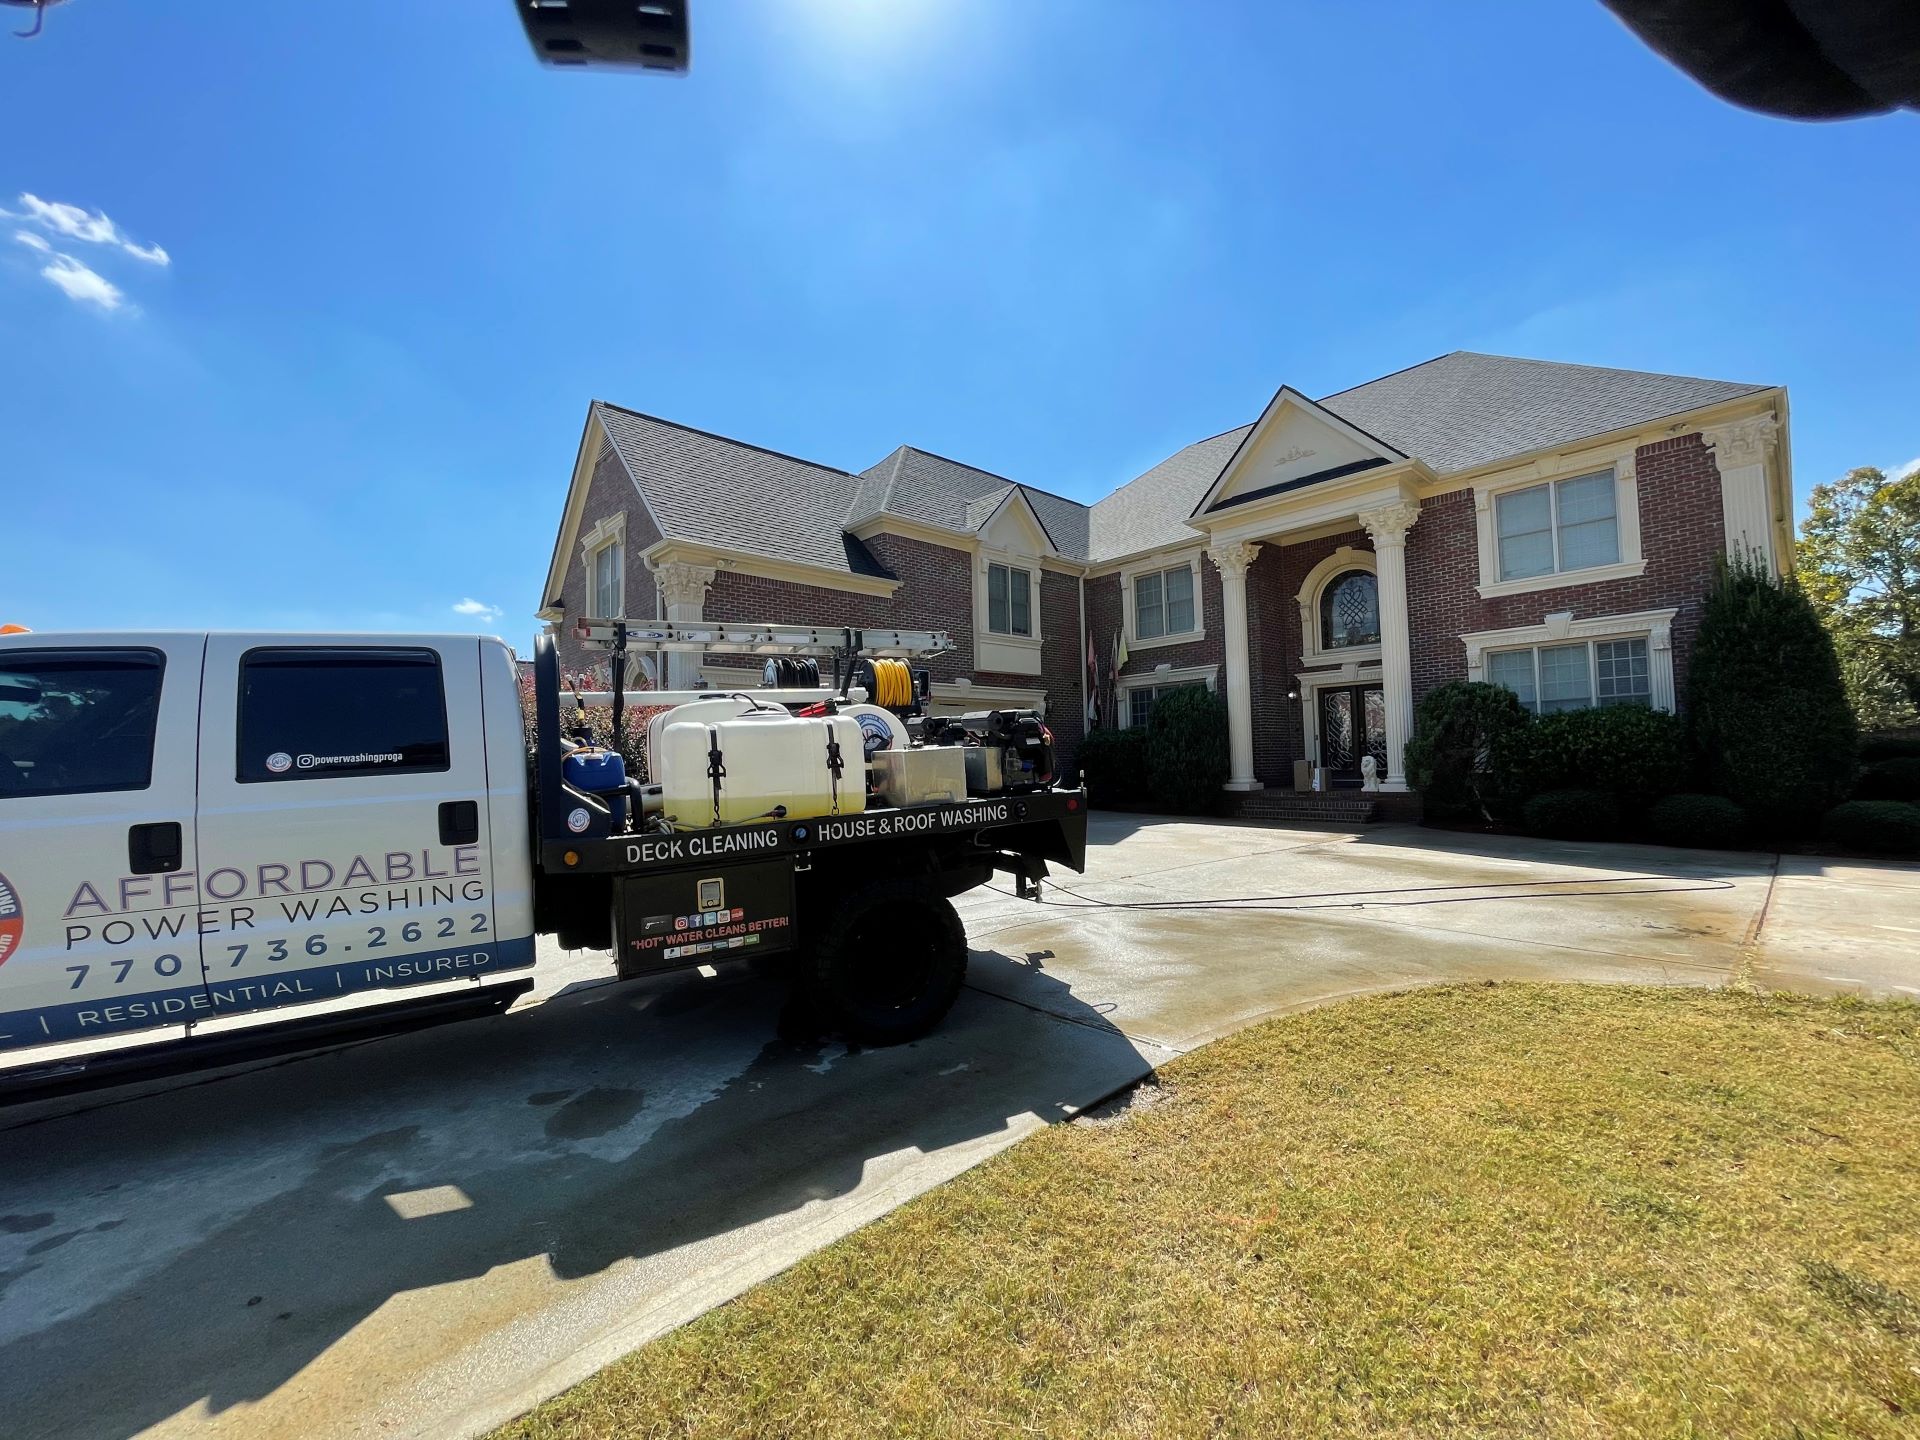 High Quality Pressure Washing Work Completed in Lawrenceville, GA